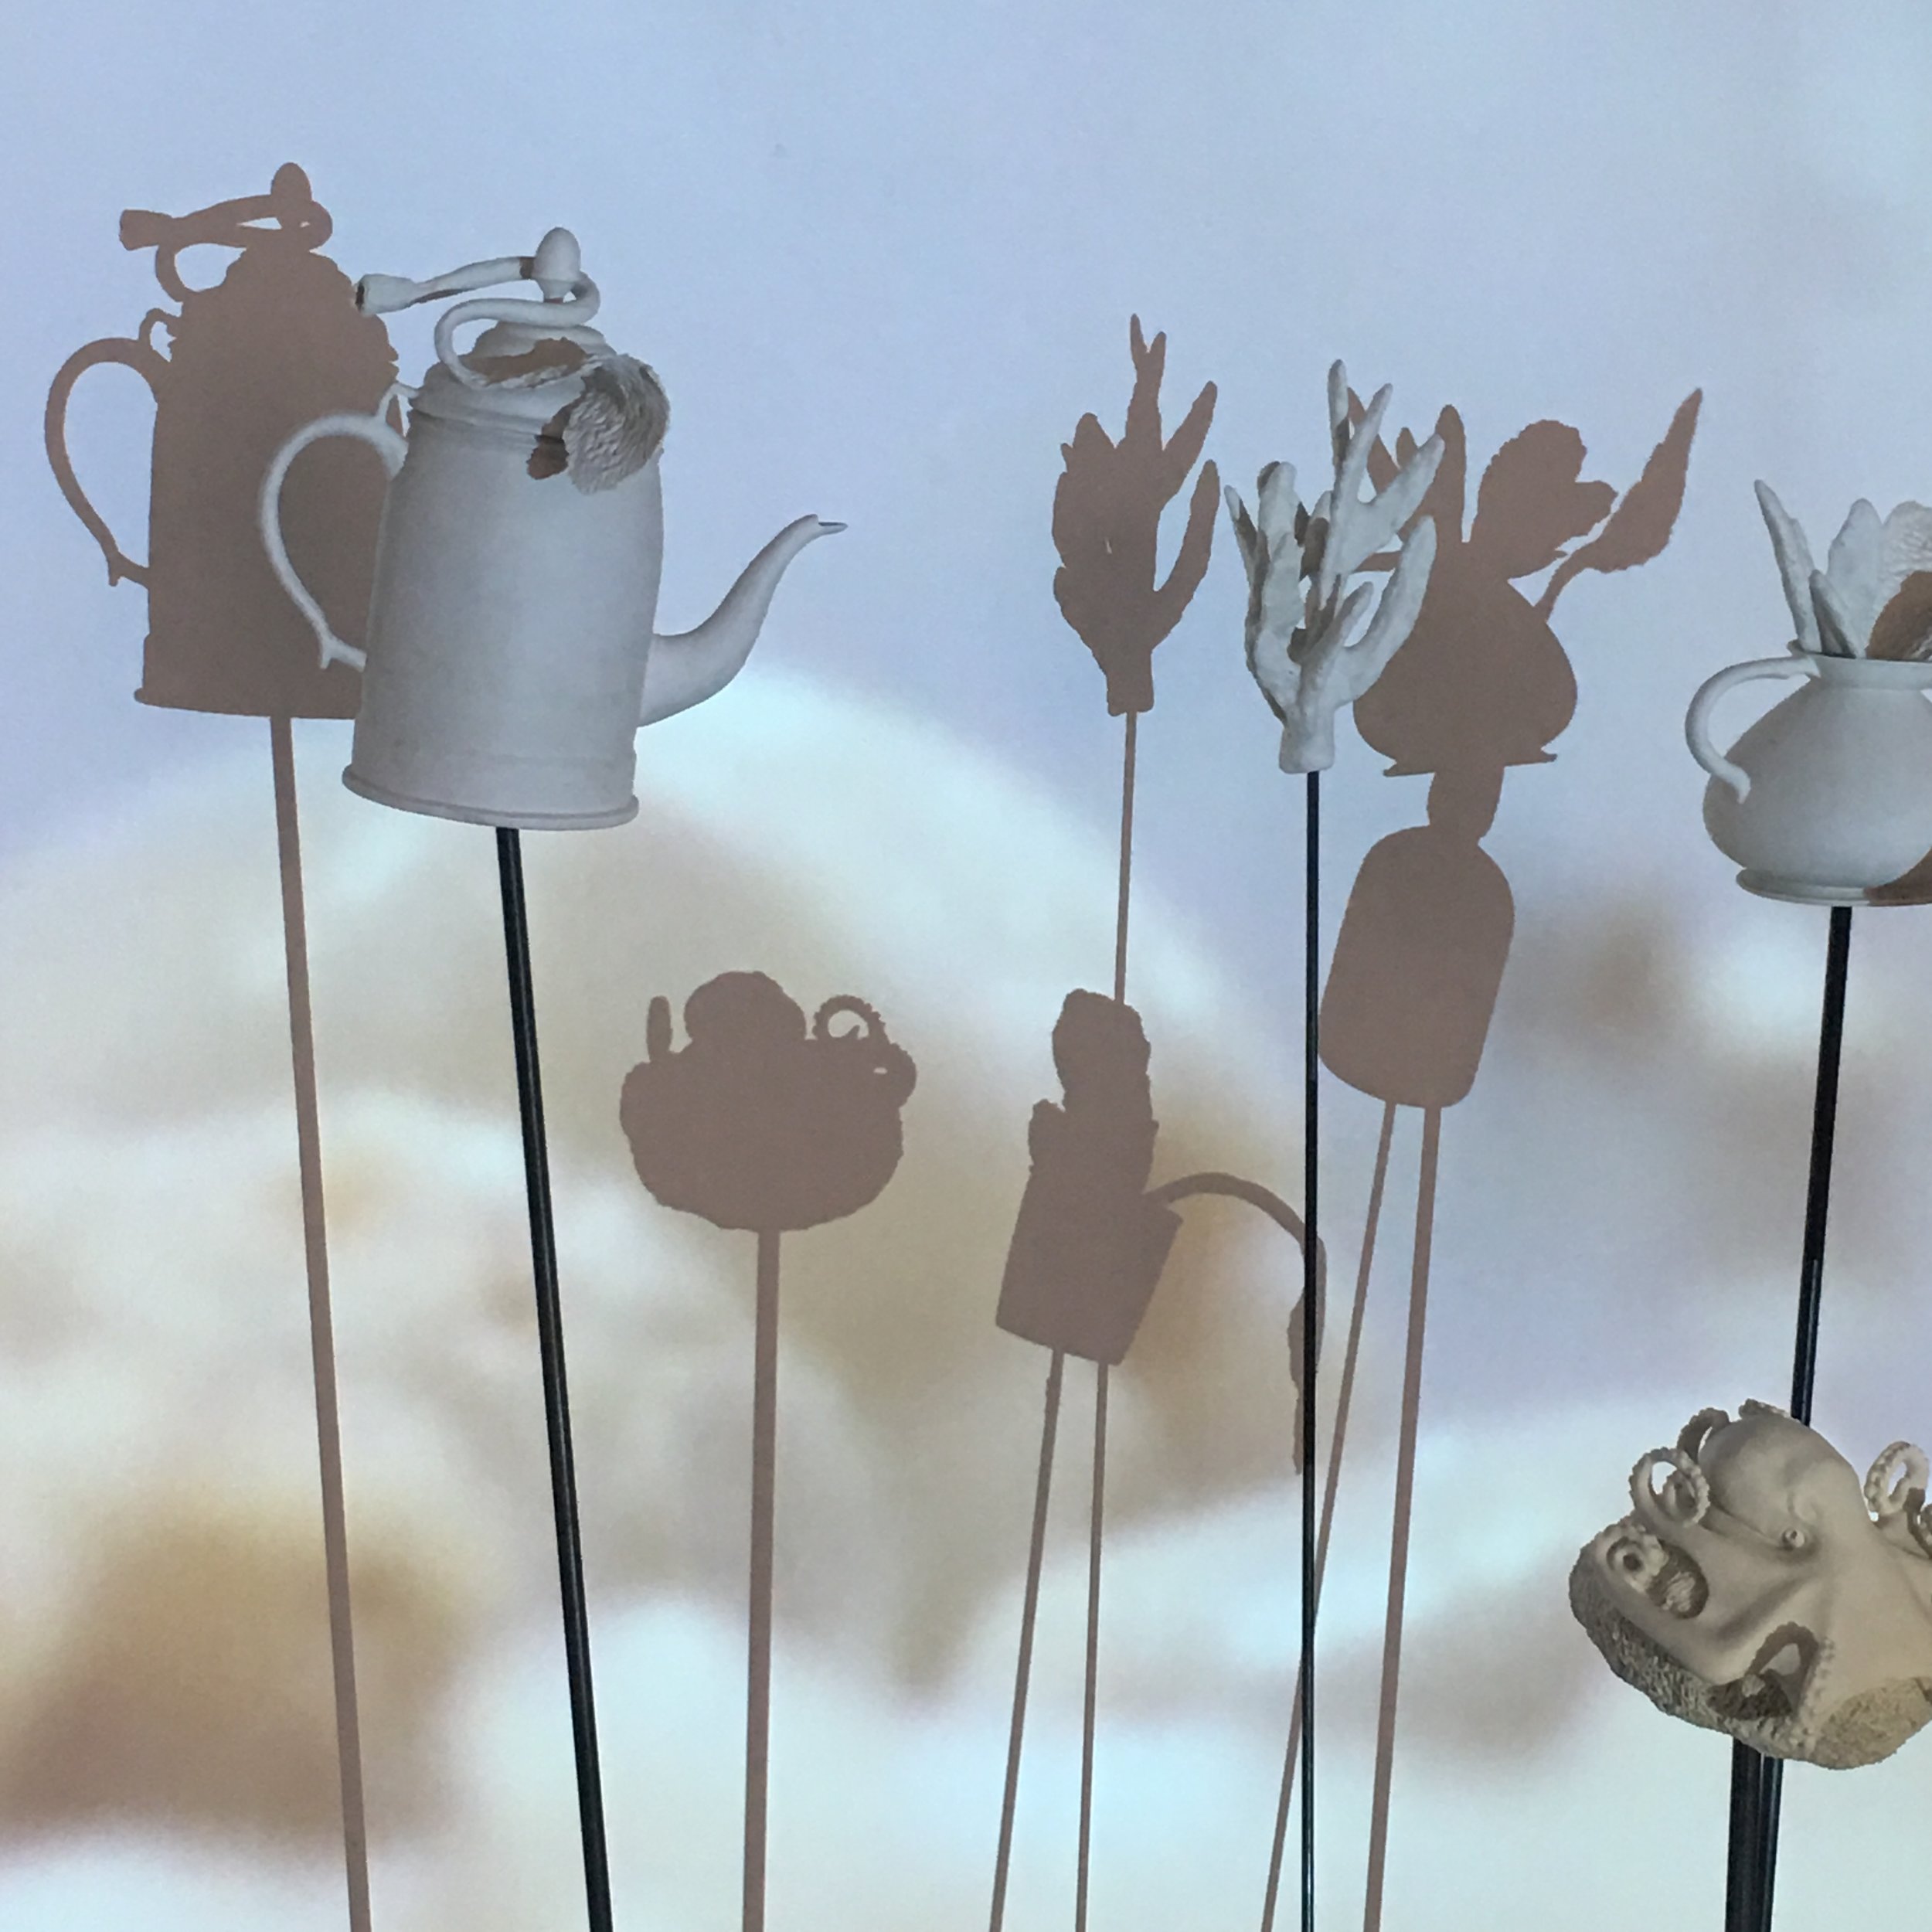  Carol Hudson  Intertidal Video , 2018. Video projection over porcelain objects mounted on steel rods. 270 x 300 cm. 